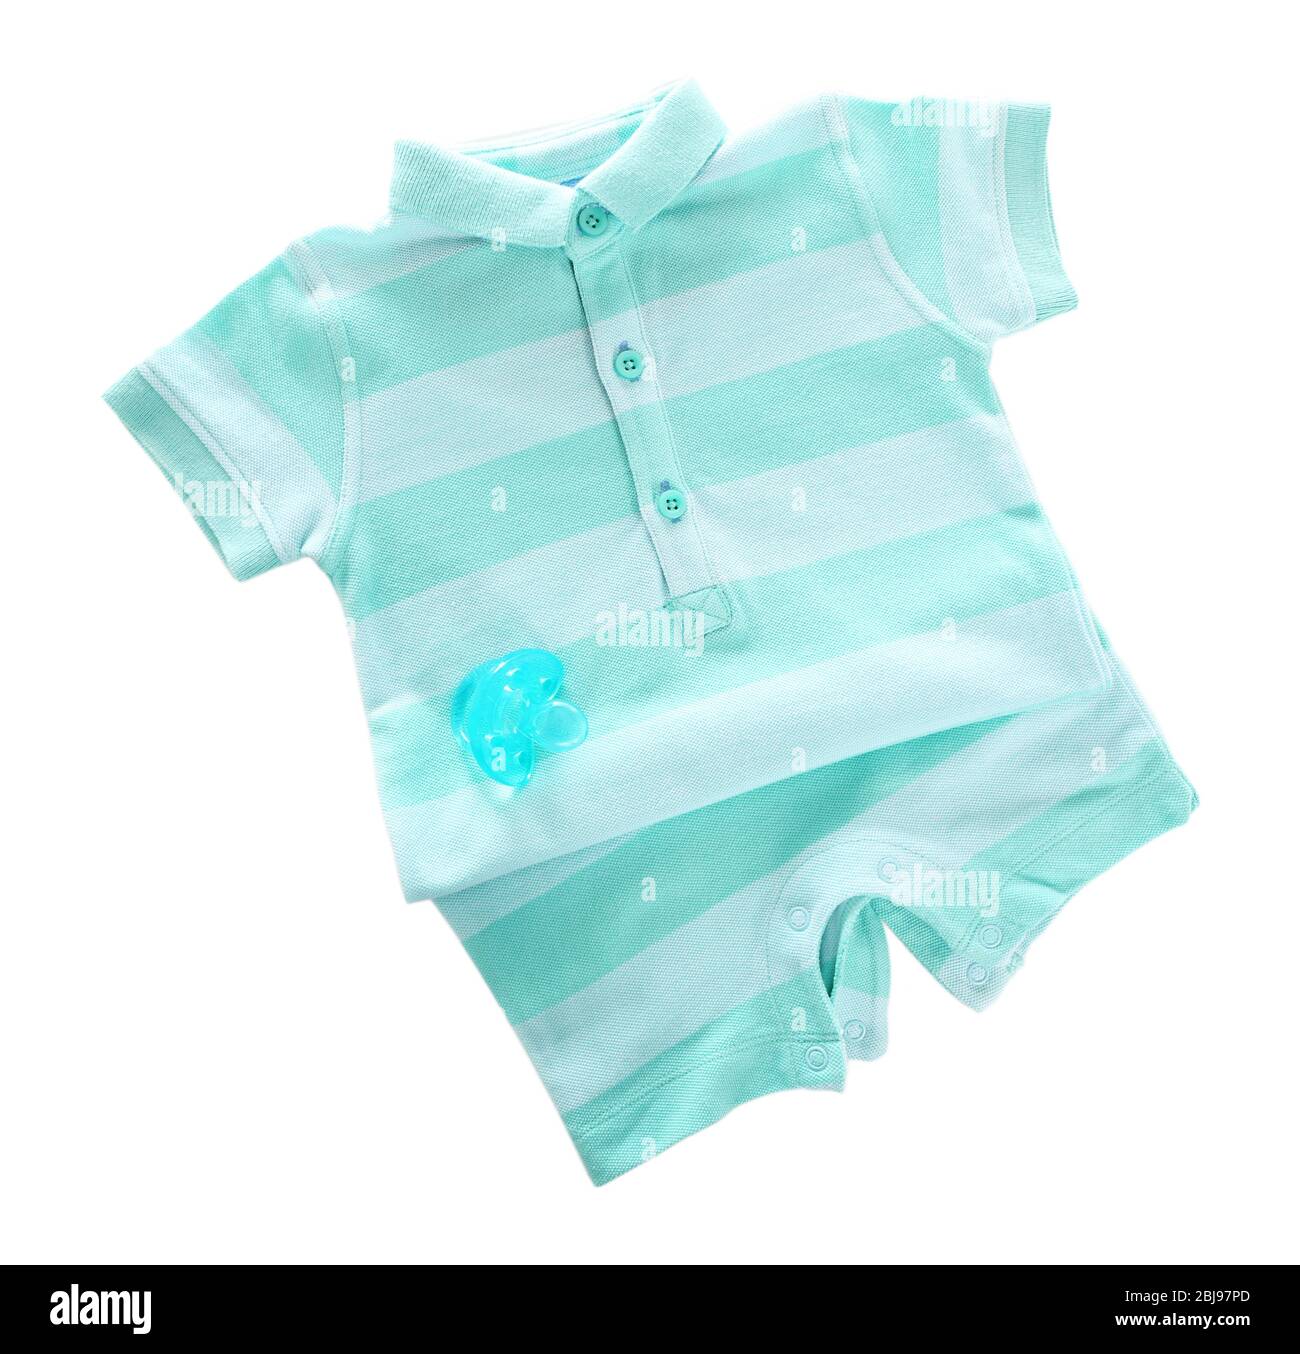 Clothes for baby girl on light background Stock Photo